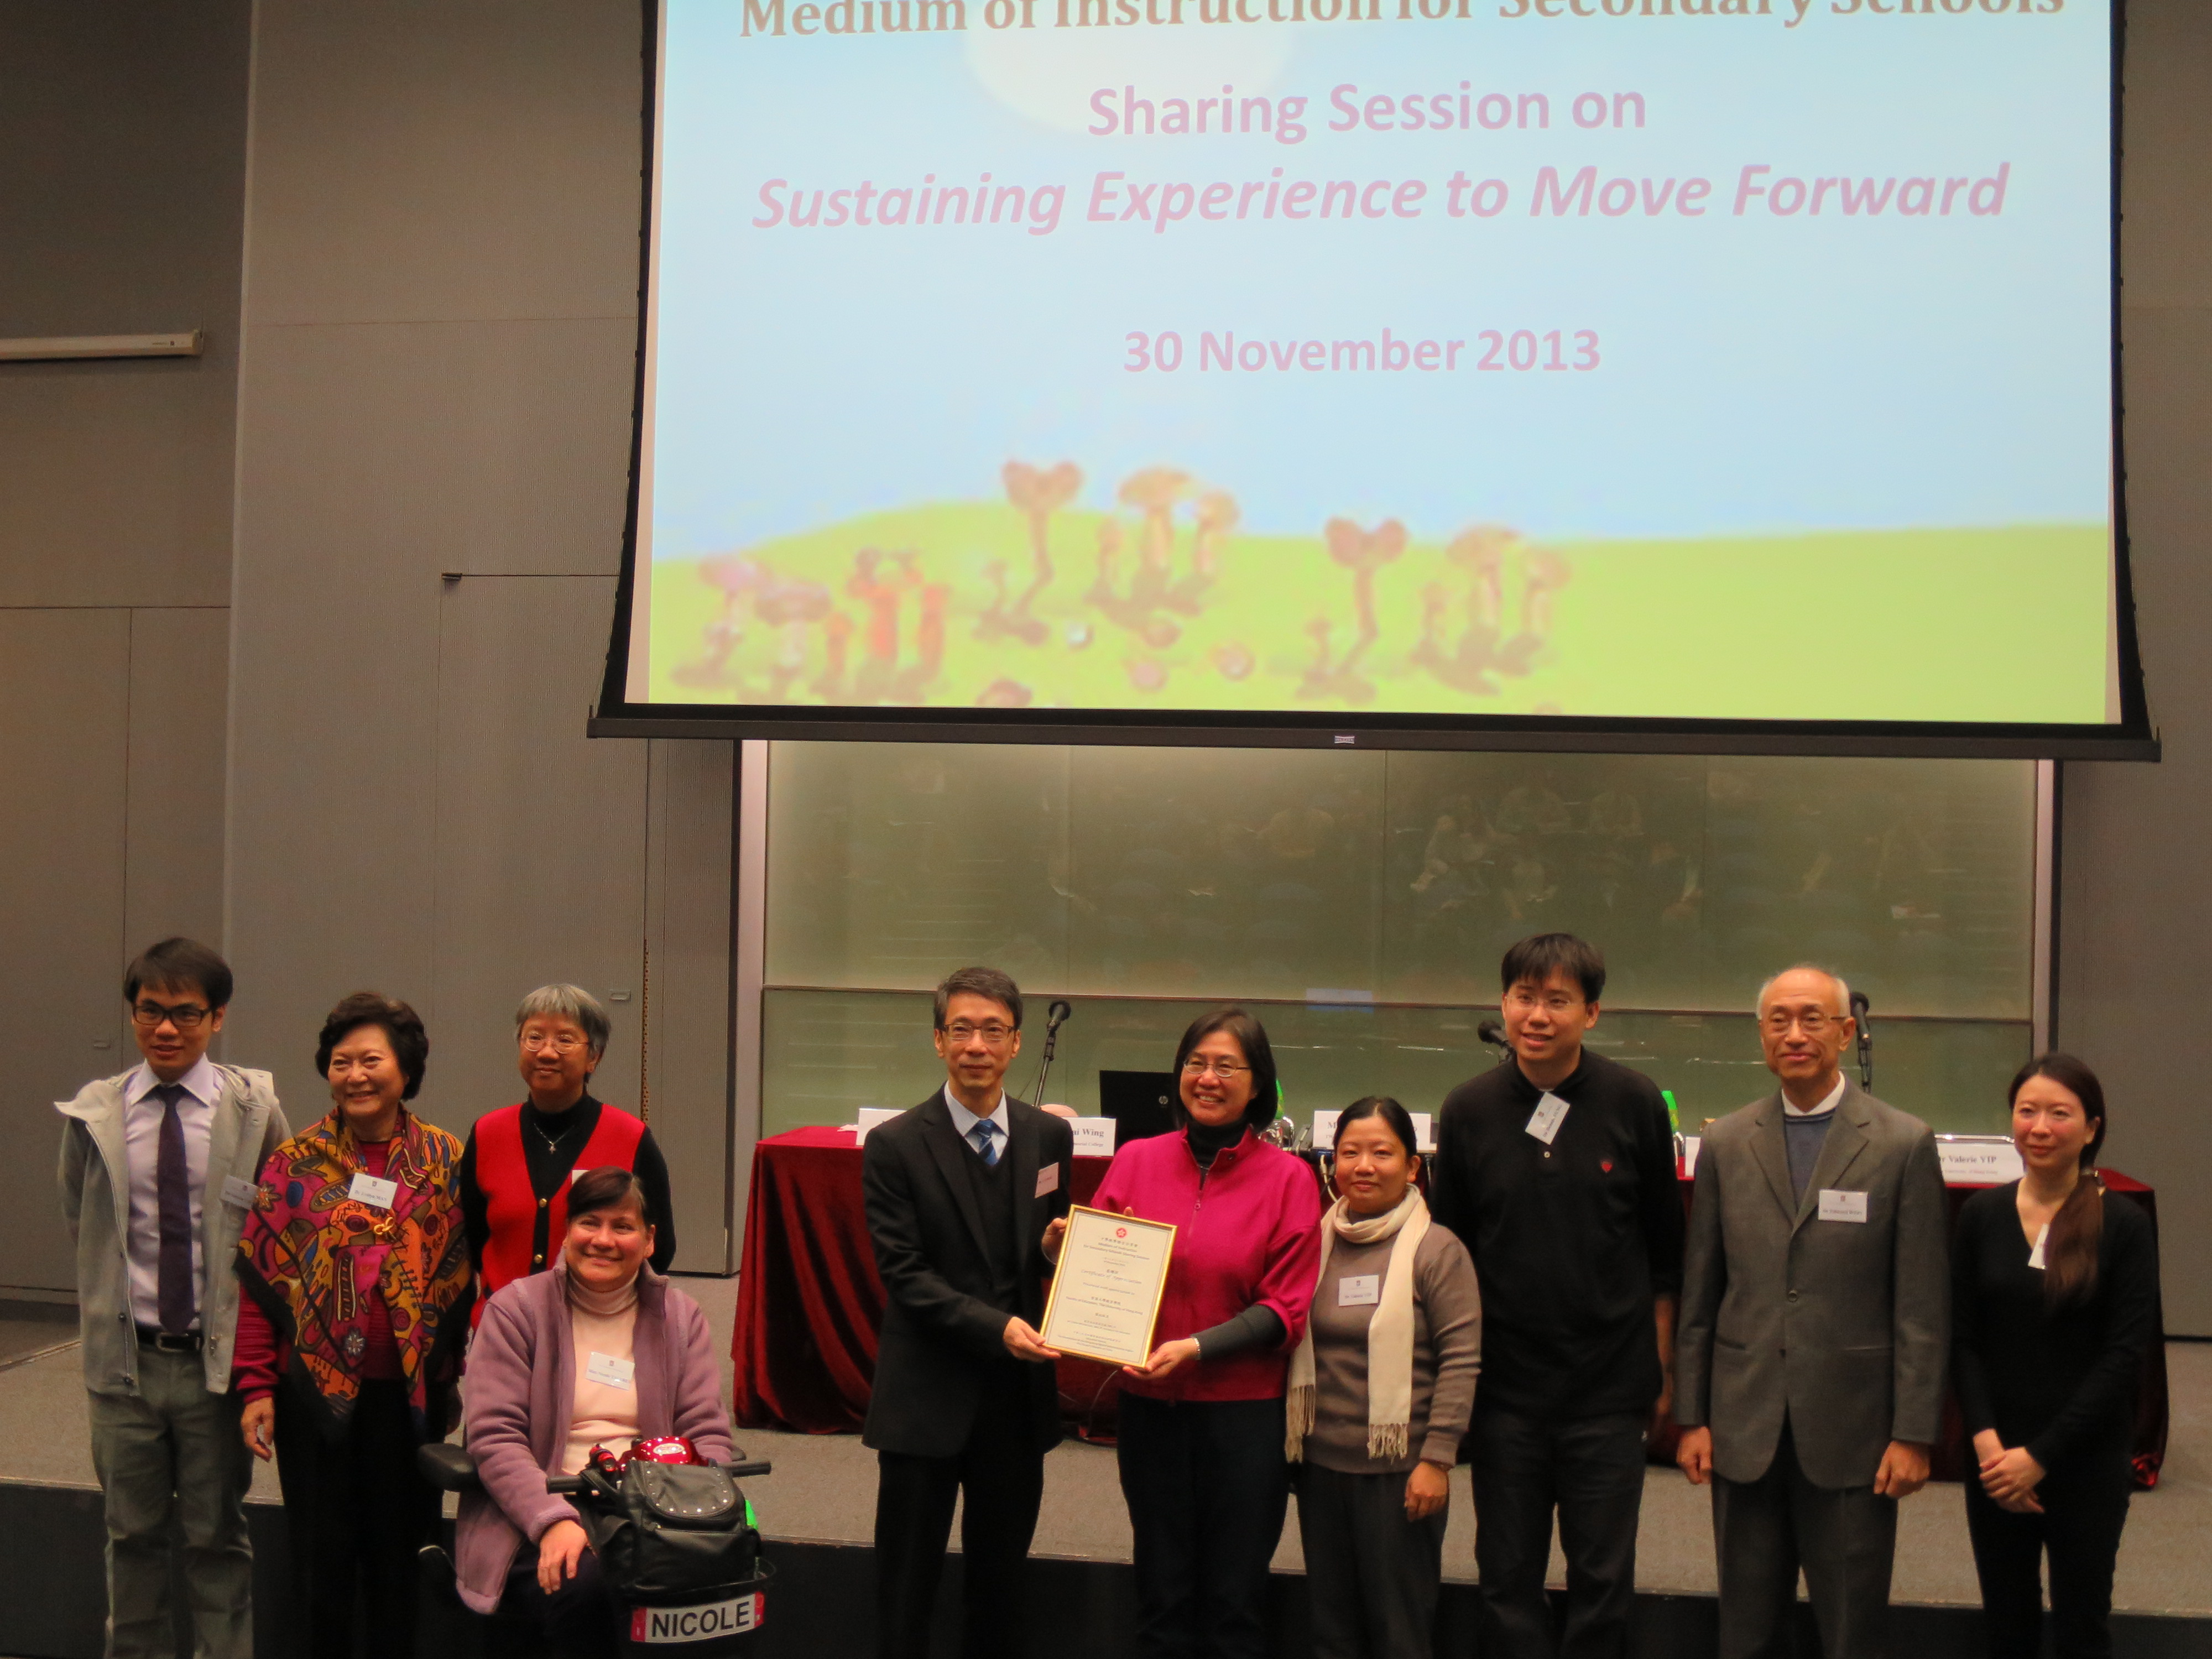 Presenting Certificate of Appreciation to The University of Hong Kong (HKU)